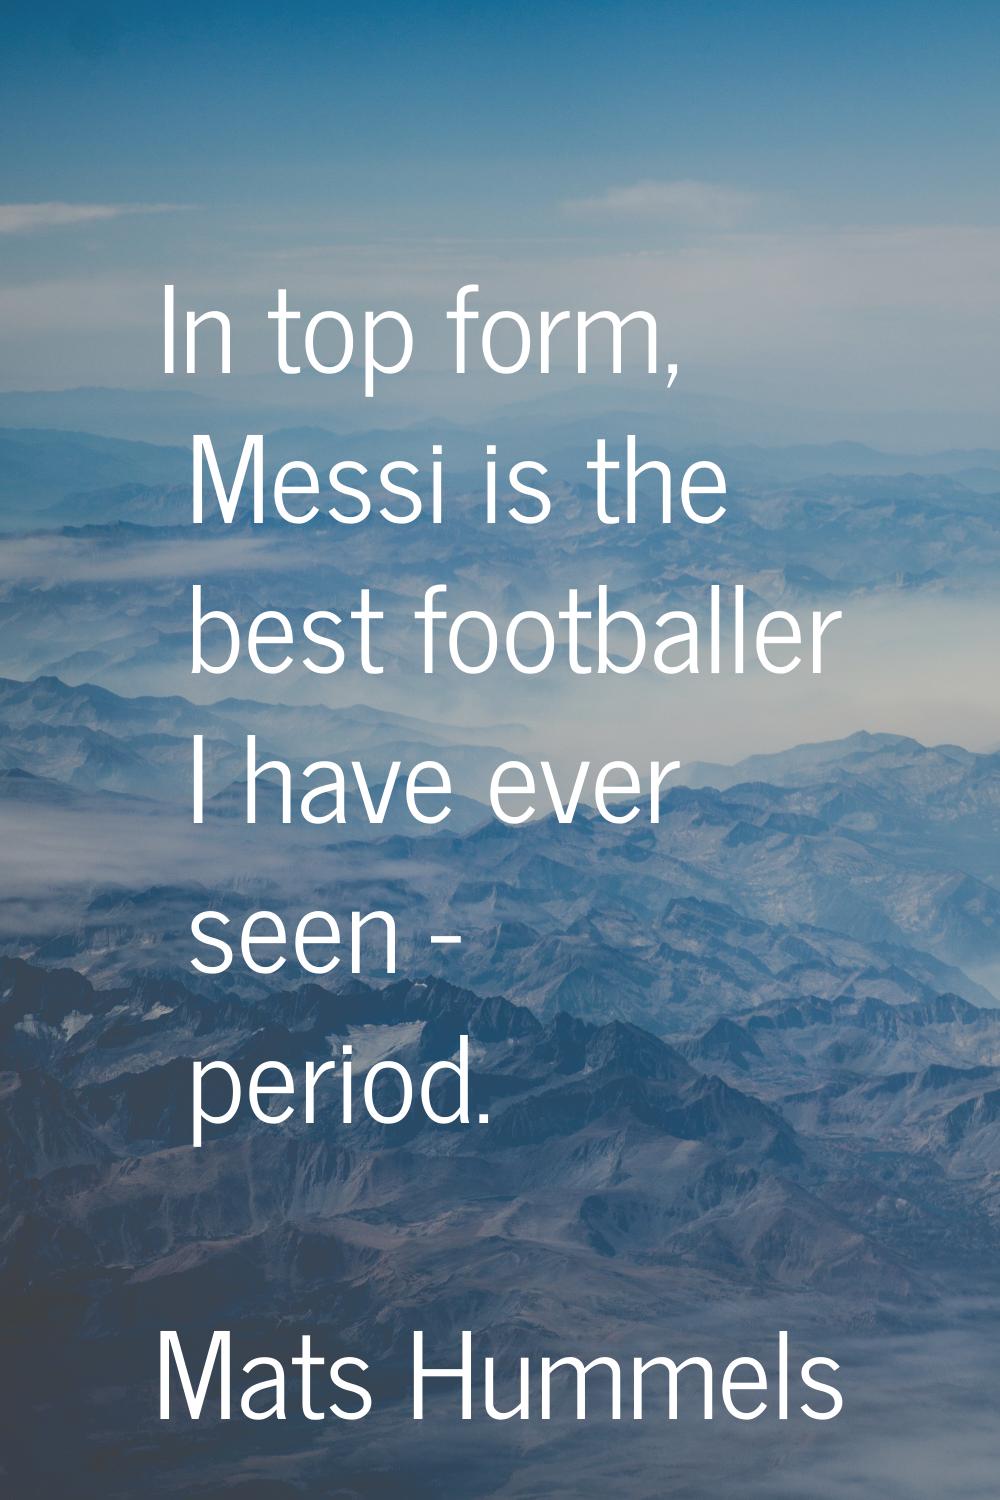 In top form, Messi is the best footballer I have ever seen - period.